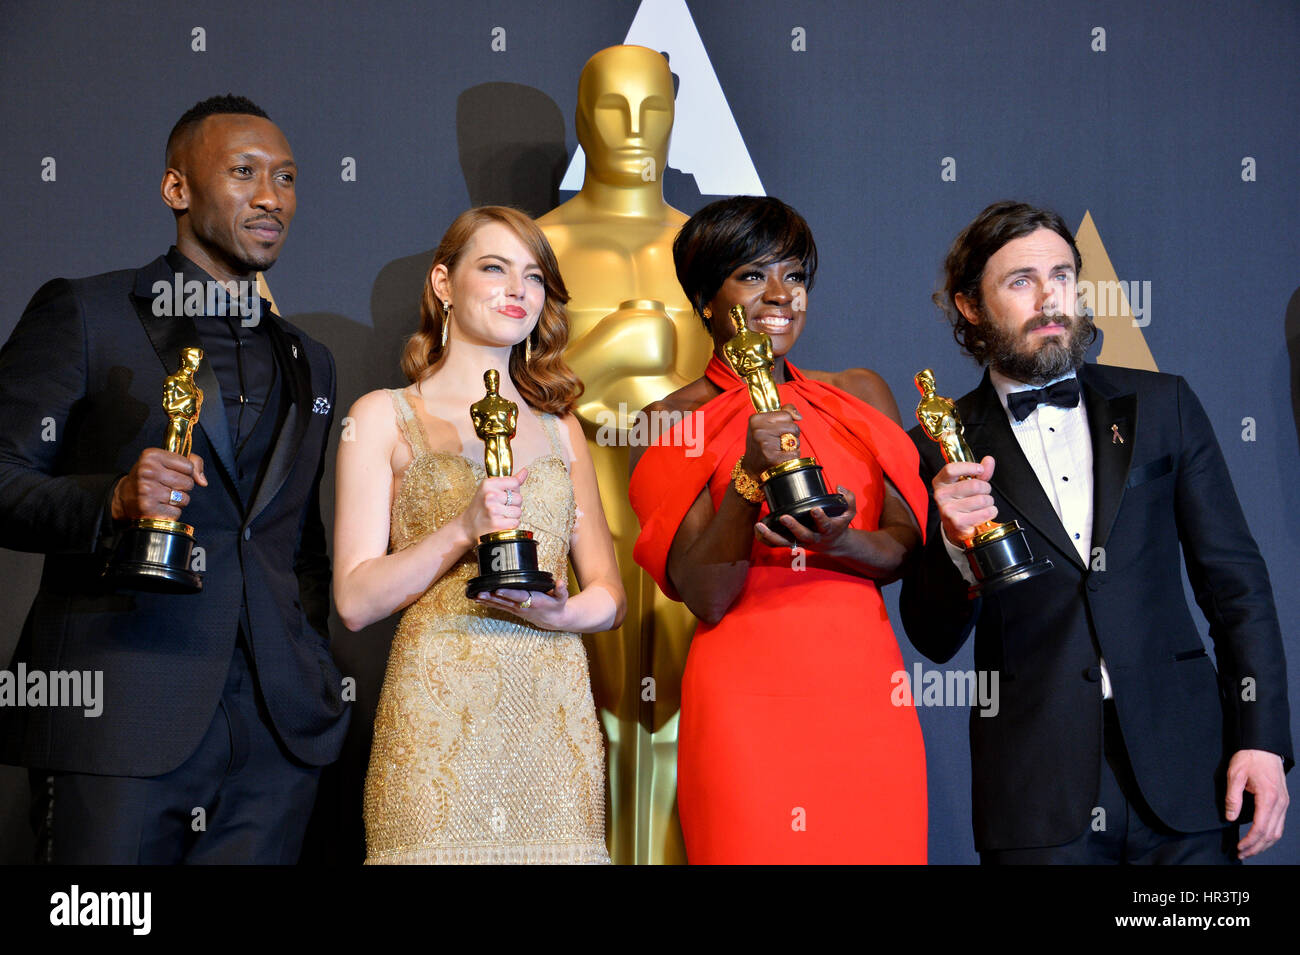 LOS ANGELES, CA. February 26, 2017: Mahershala Ali, Emma Stone, Viola Davis & Casey Affleck in the photo room at the 89th Annual Academy Awards at the Dolby Theatre, Los Angeles.   Stock Photo